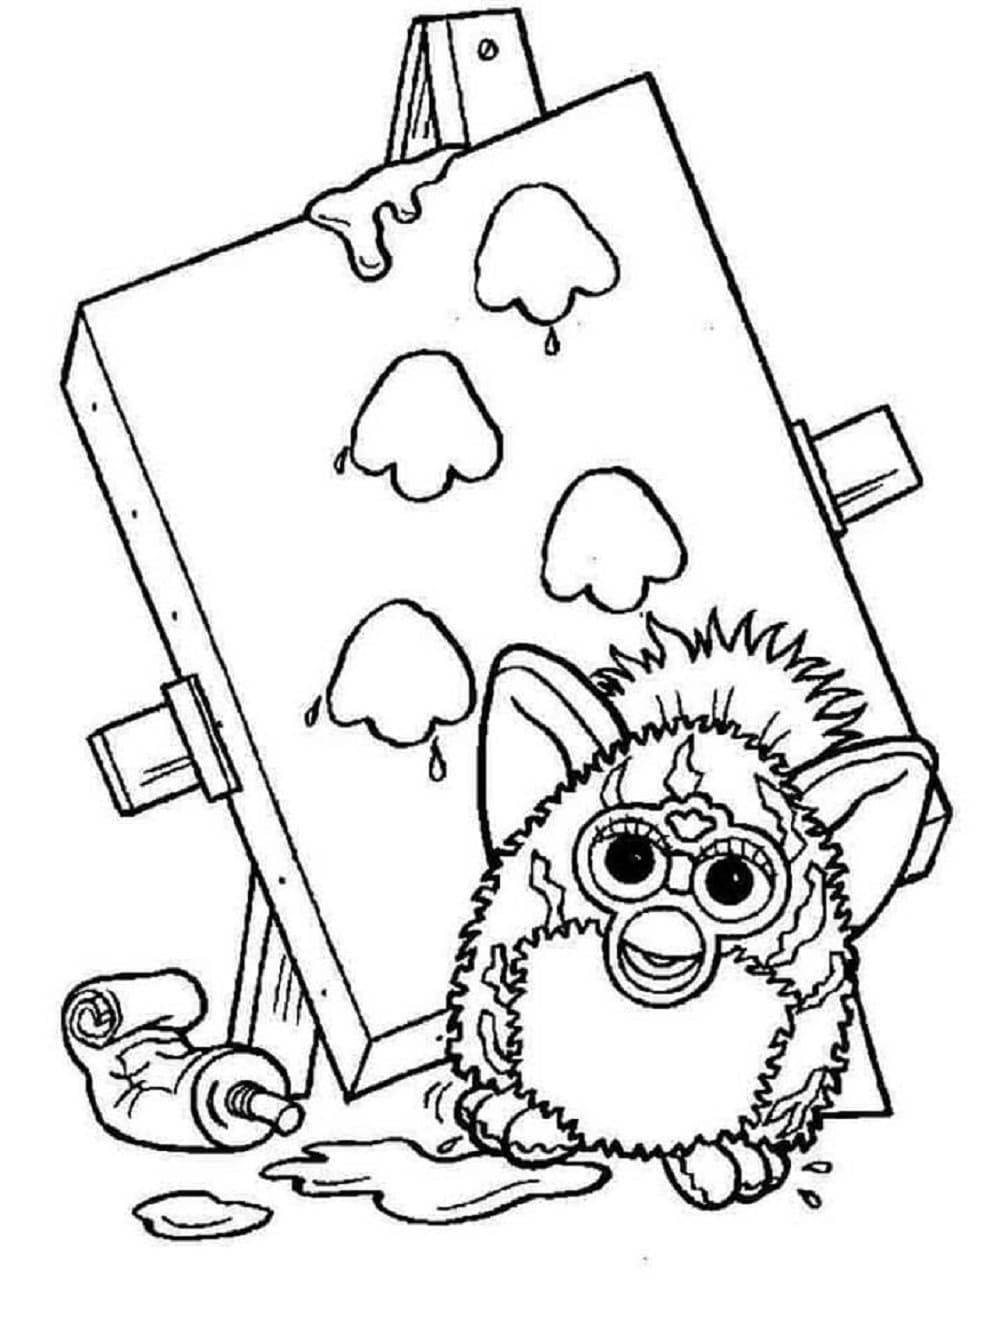 Printable Furby is Painting Coloring Page